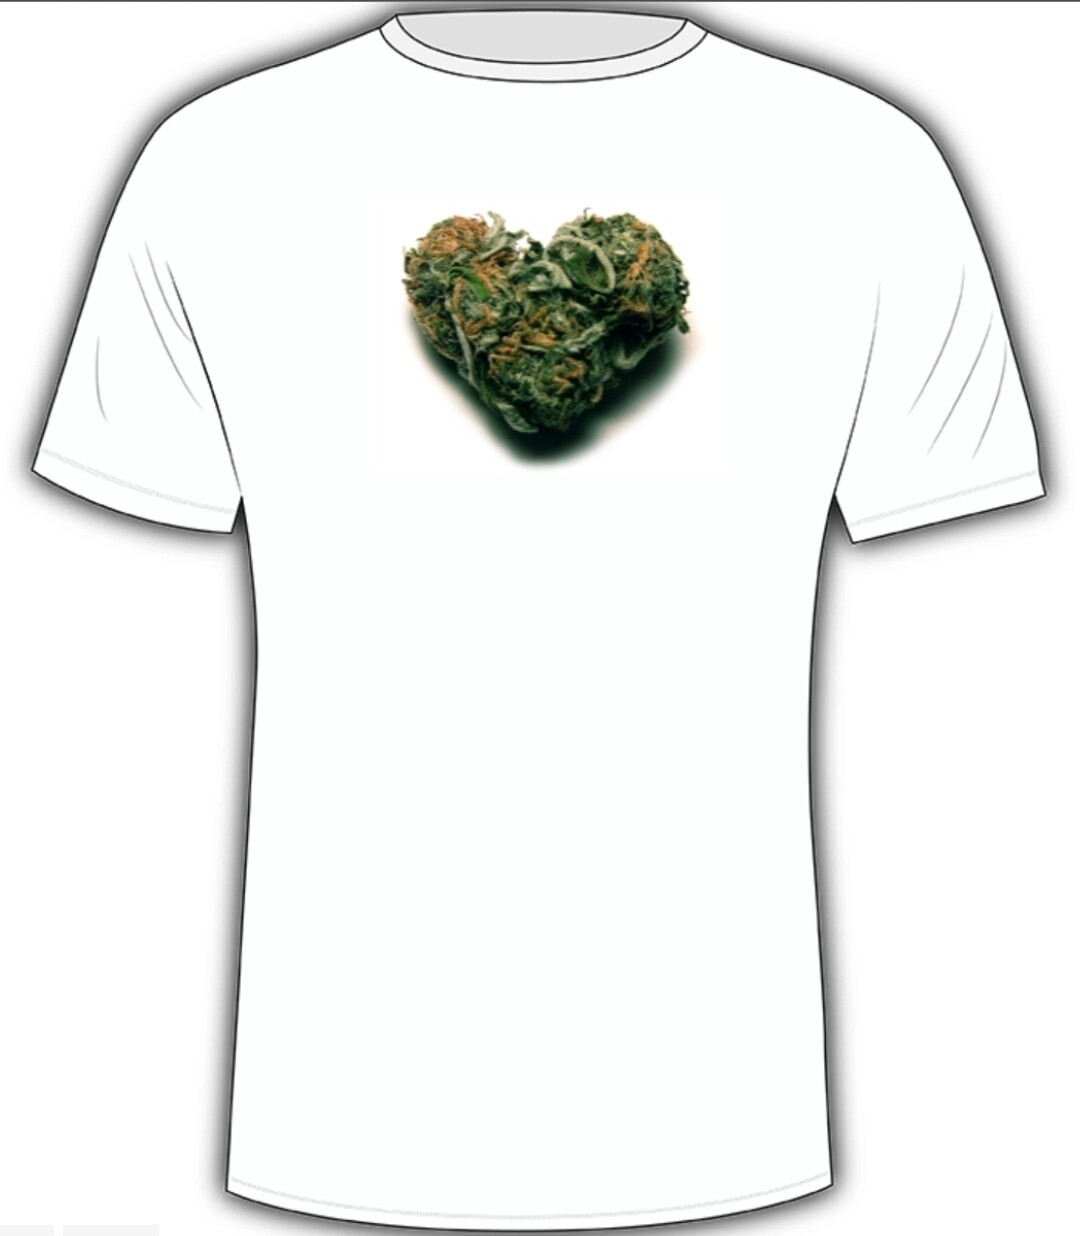 Heart 80/20 cotton poly blend slight faded look